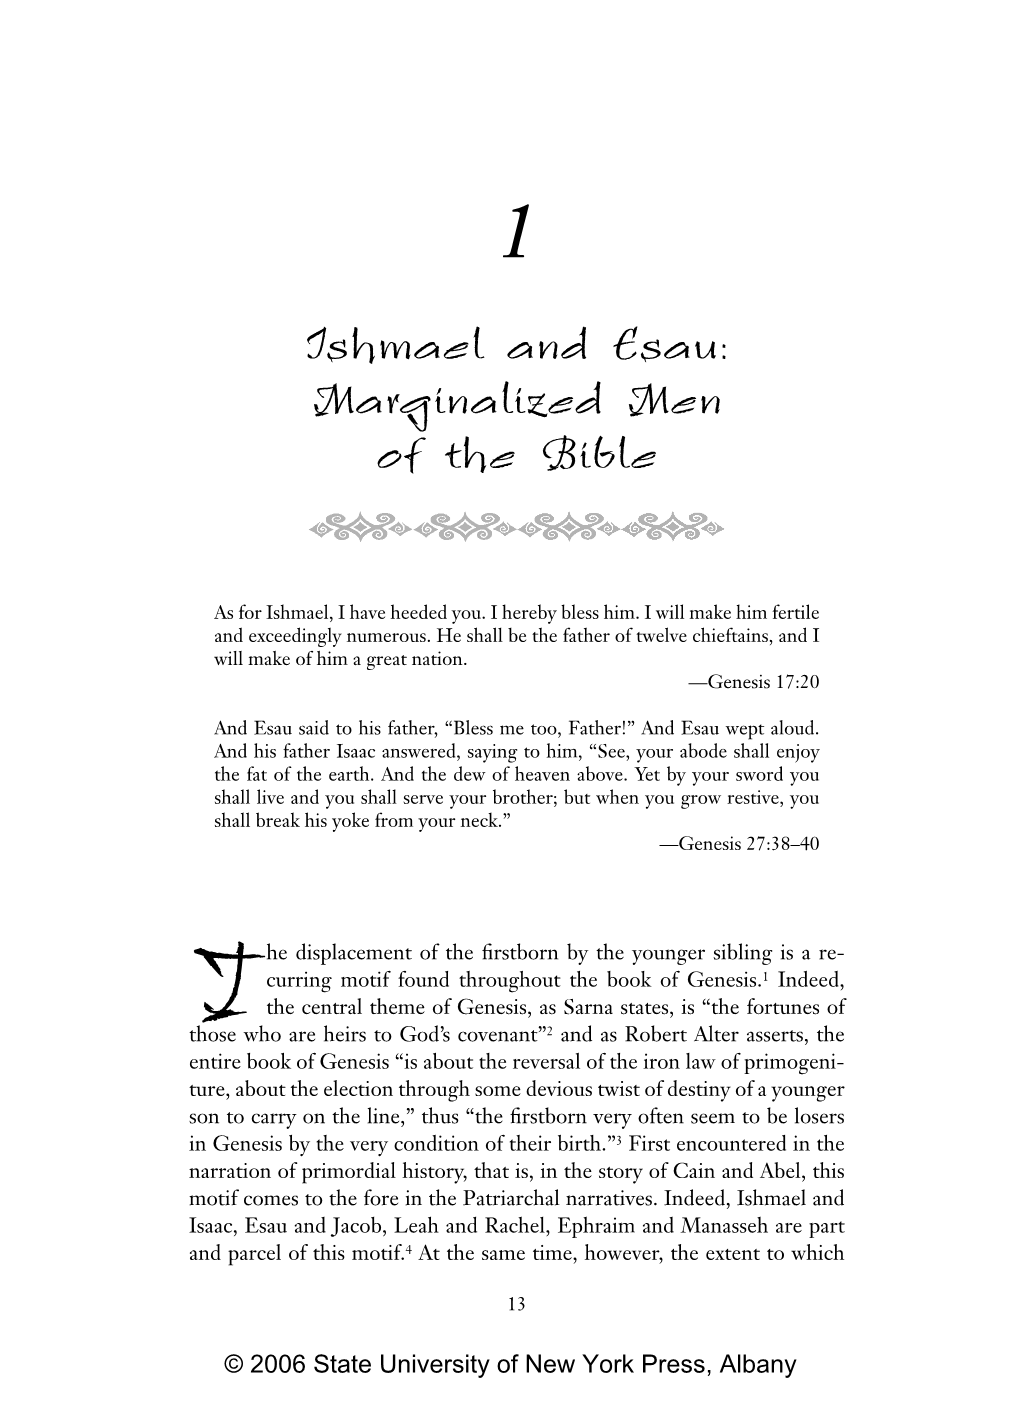 Ishmael and Esau: Marginalized Men of the Bible